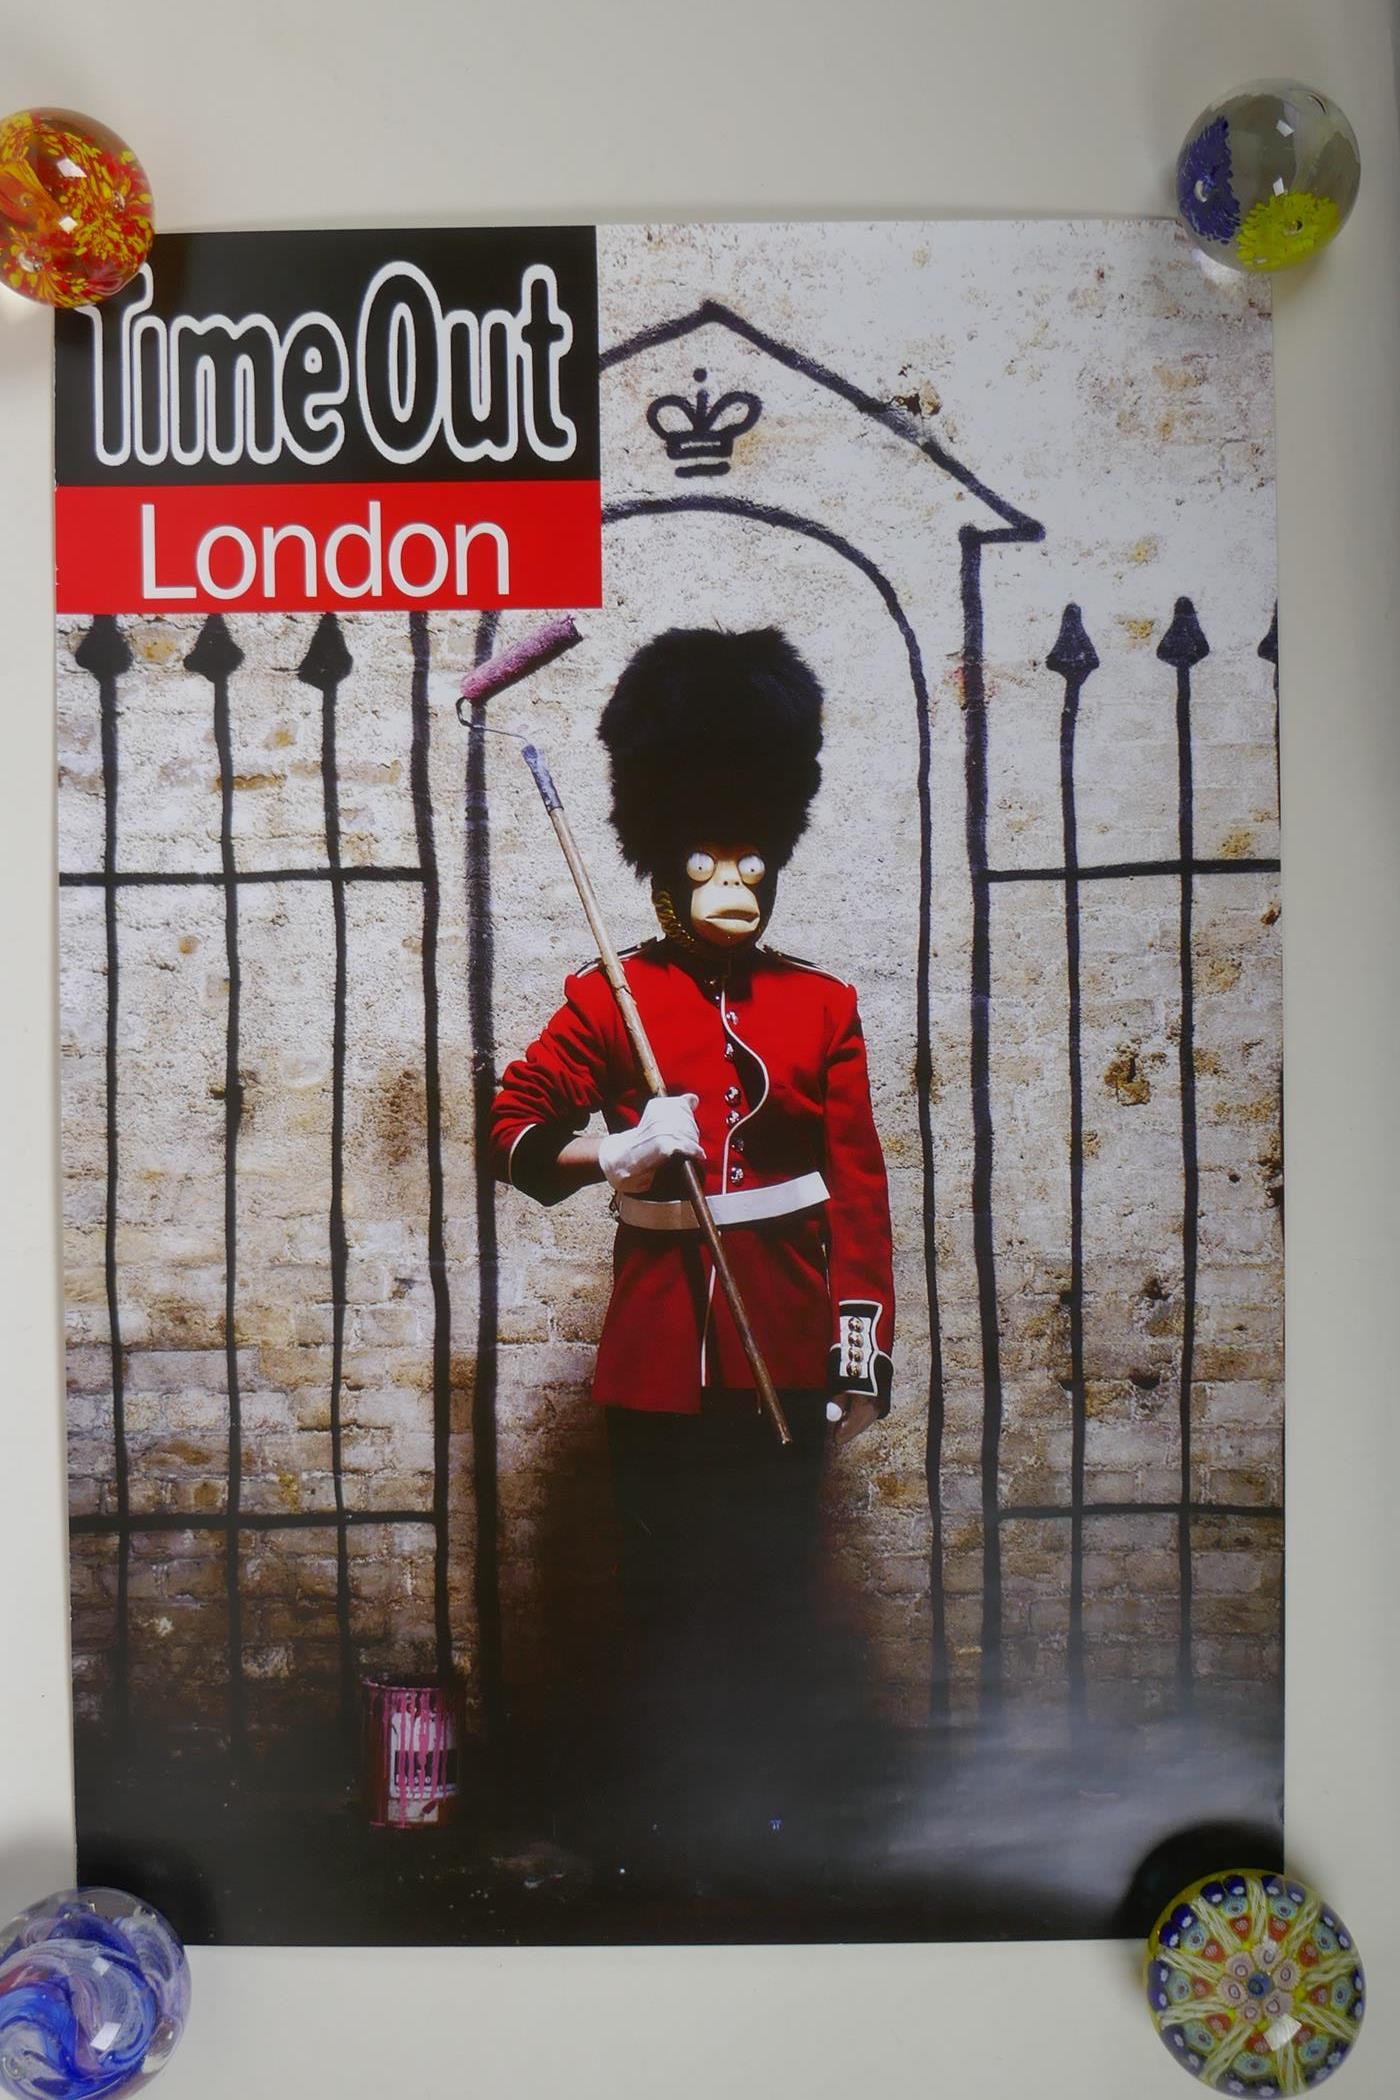 After Banksy, Time Out London, 2010, poster print, 42 x 59cm - Image 2 of 2